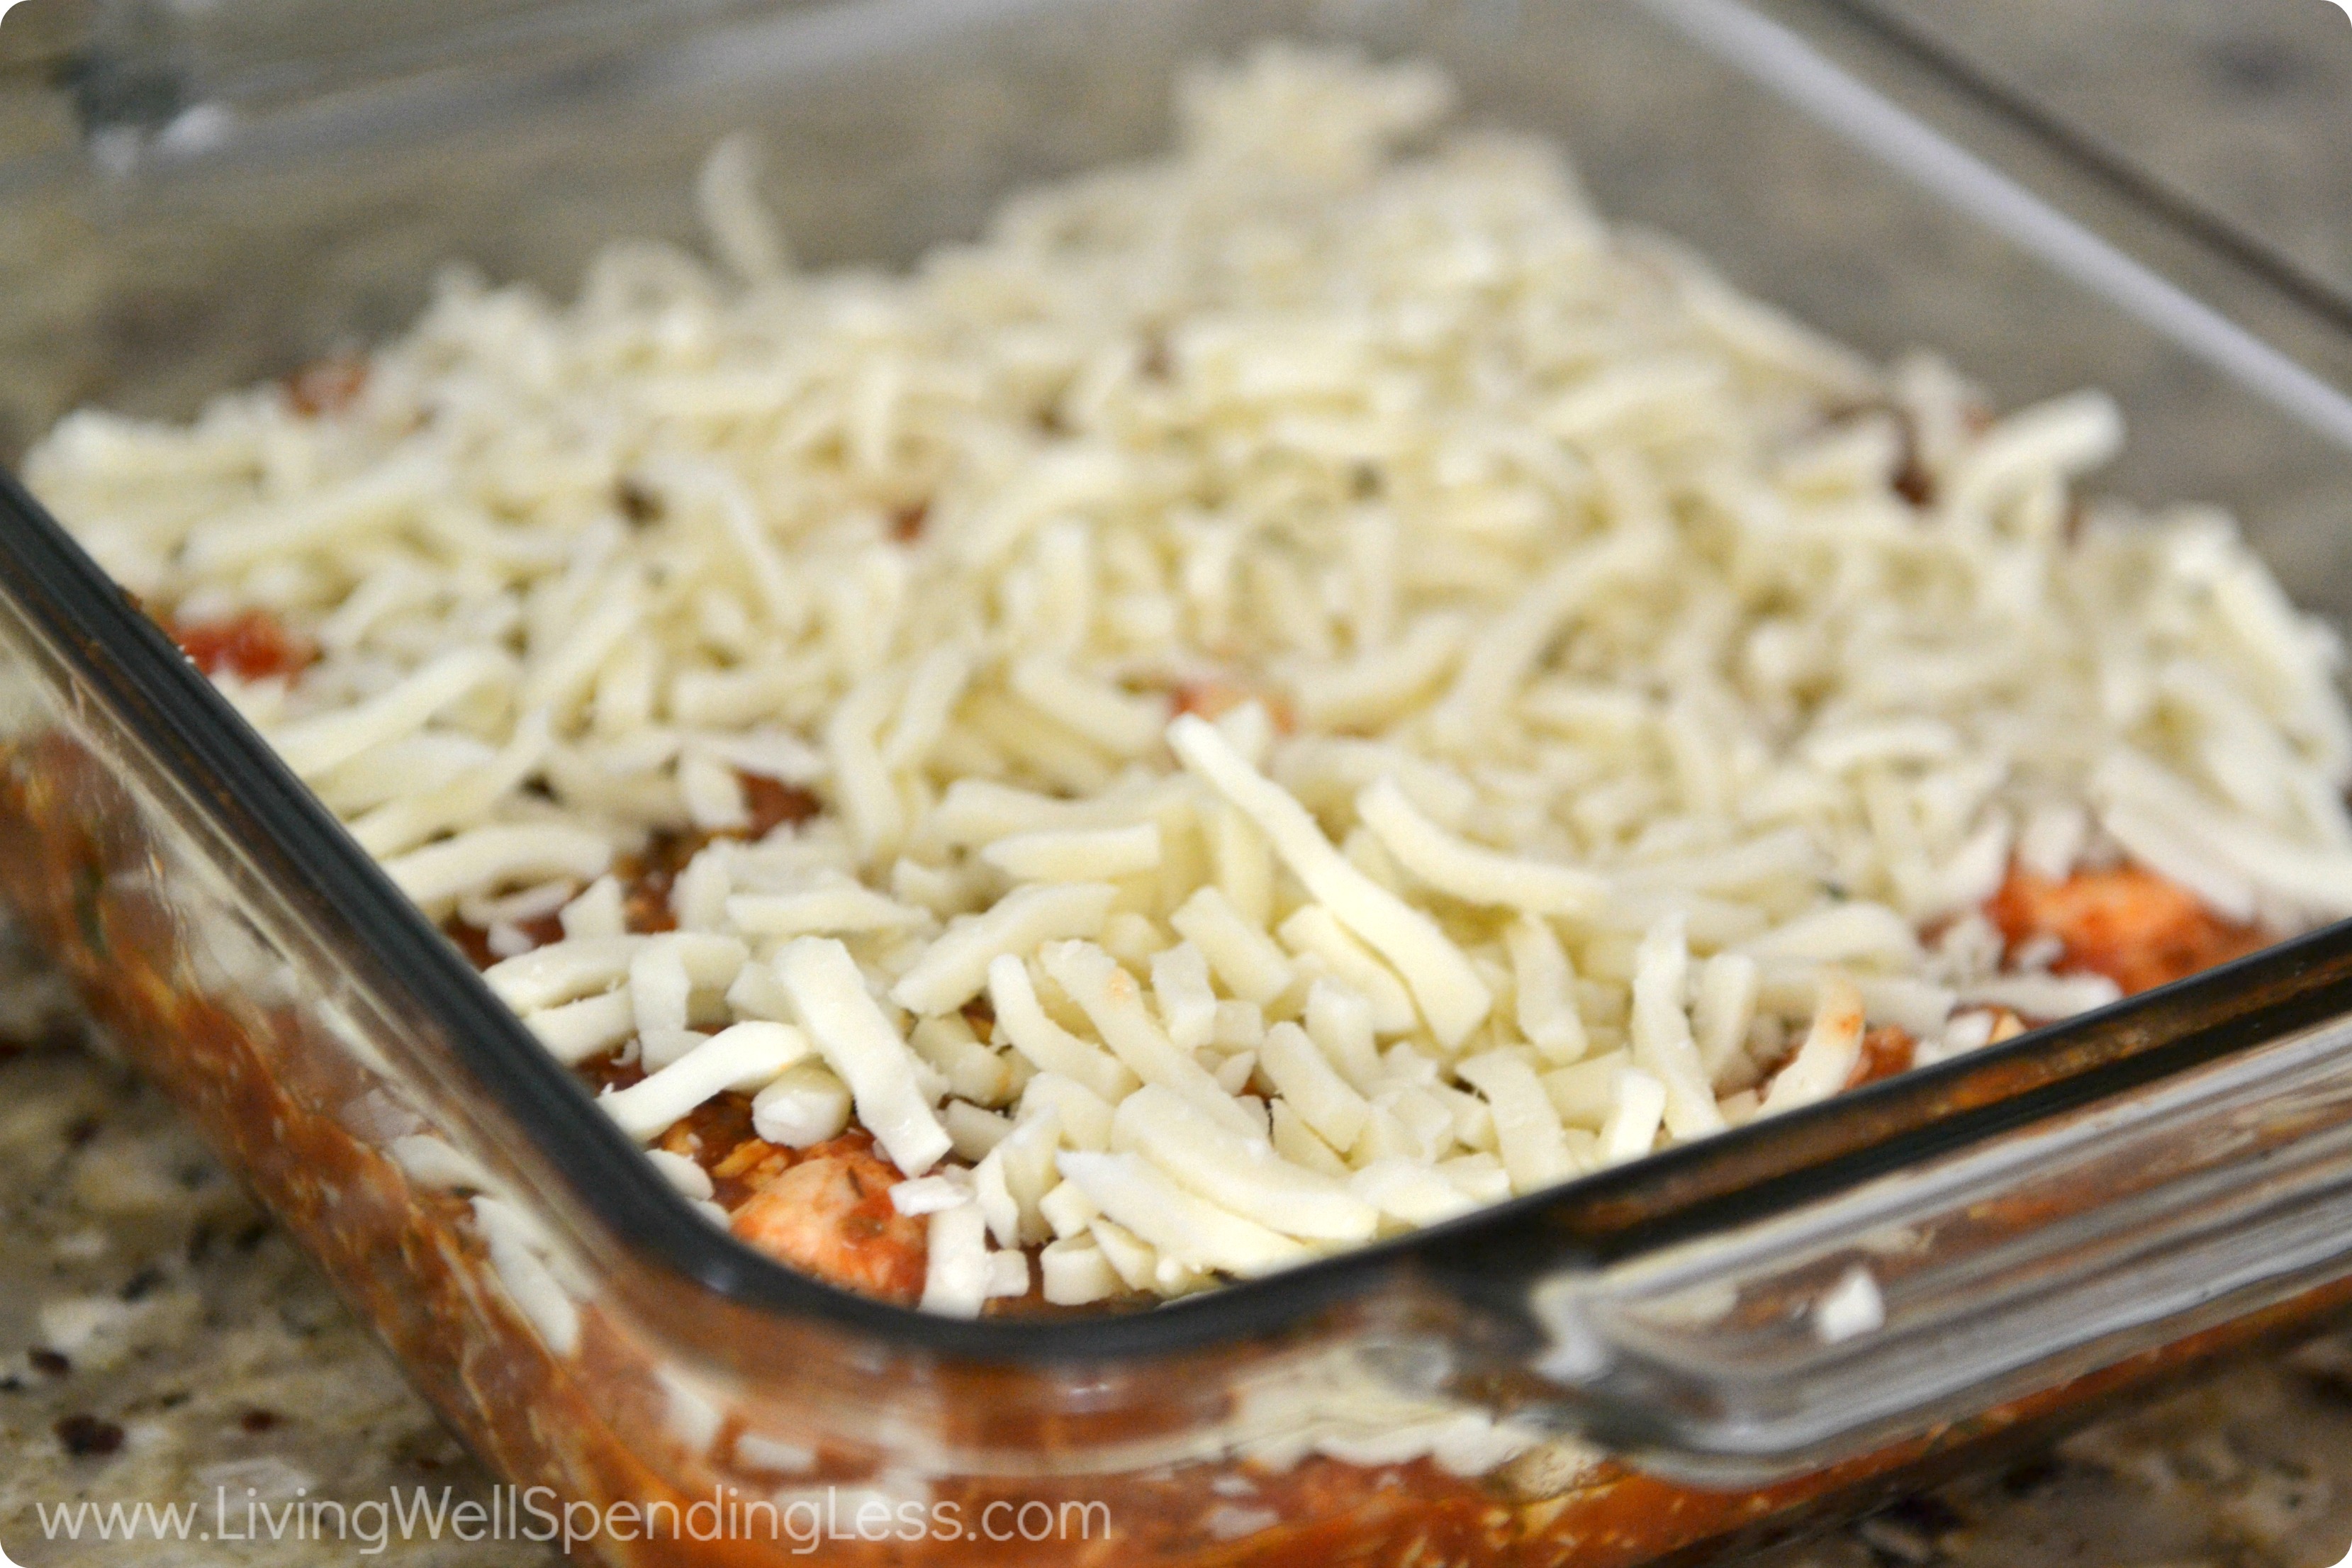 Pour mixture over chicken in a casserole dish and cover with shredded cheese.